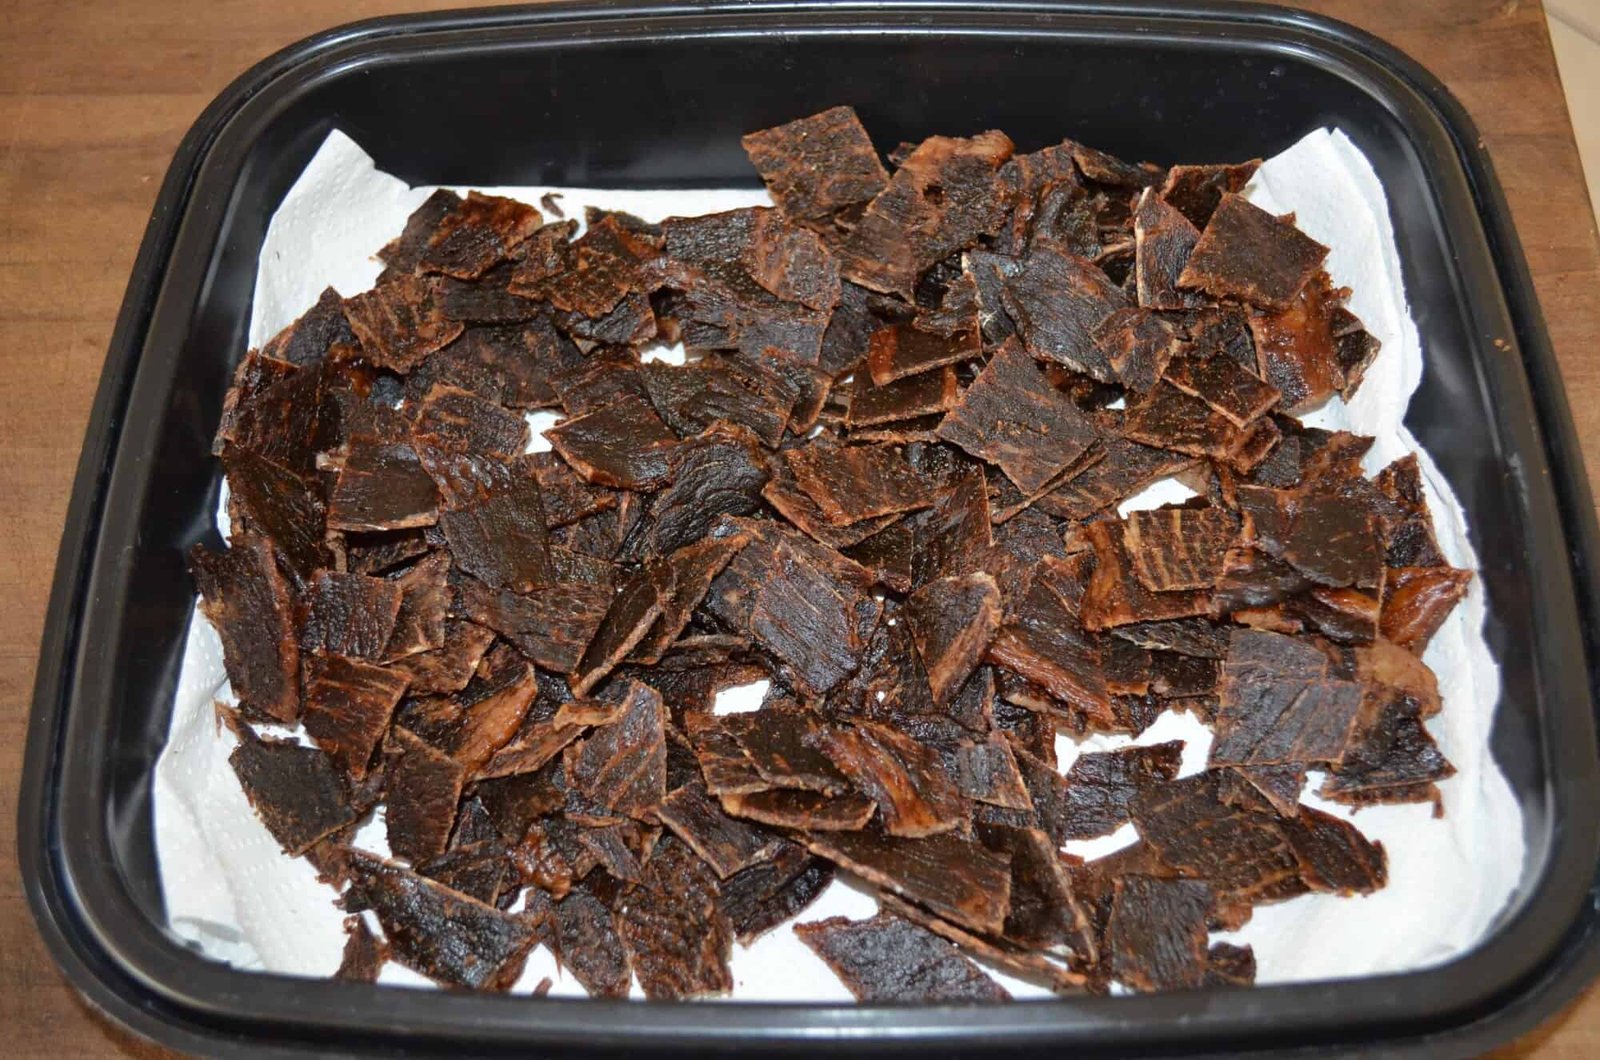 Sliced dehydrated jerky on parchment paper